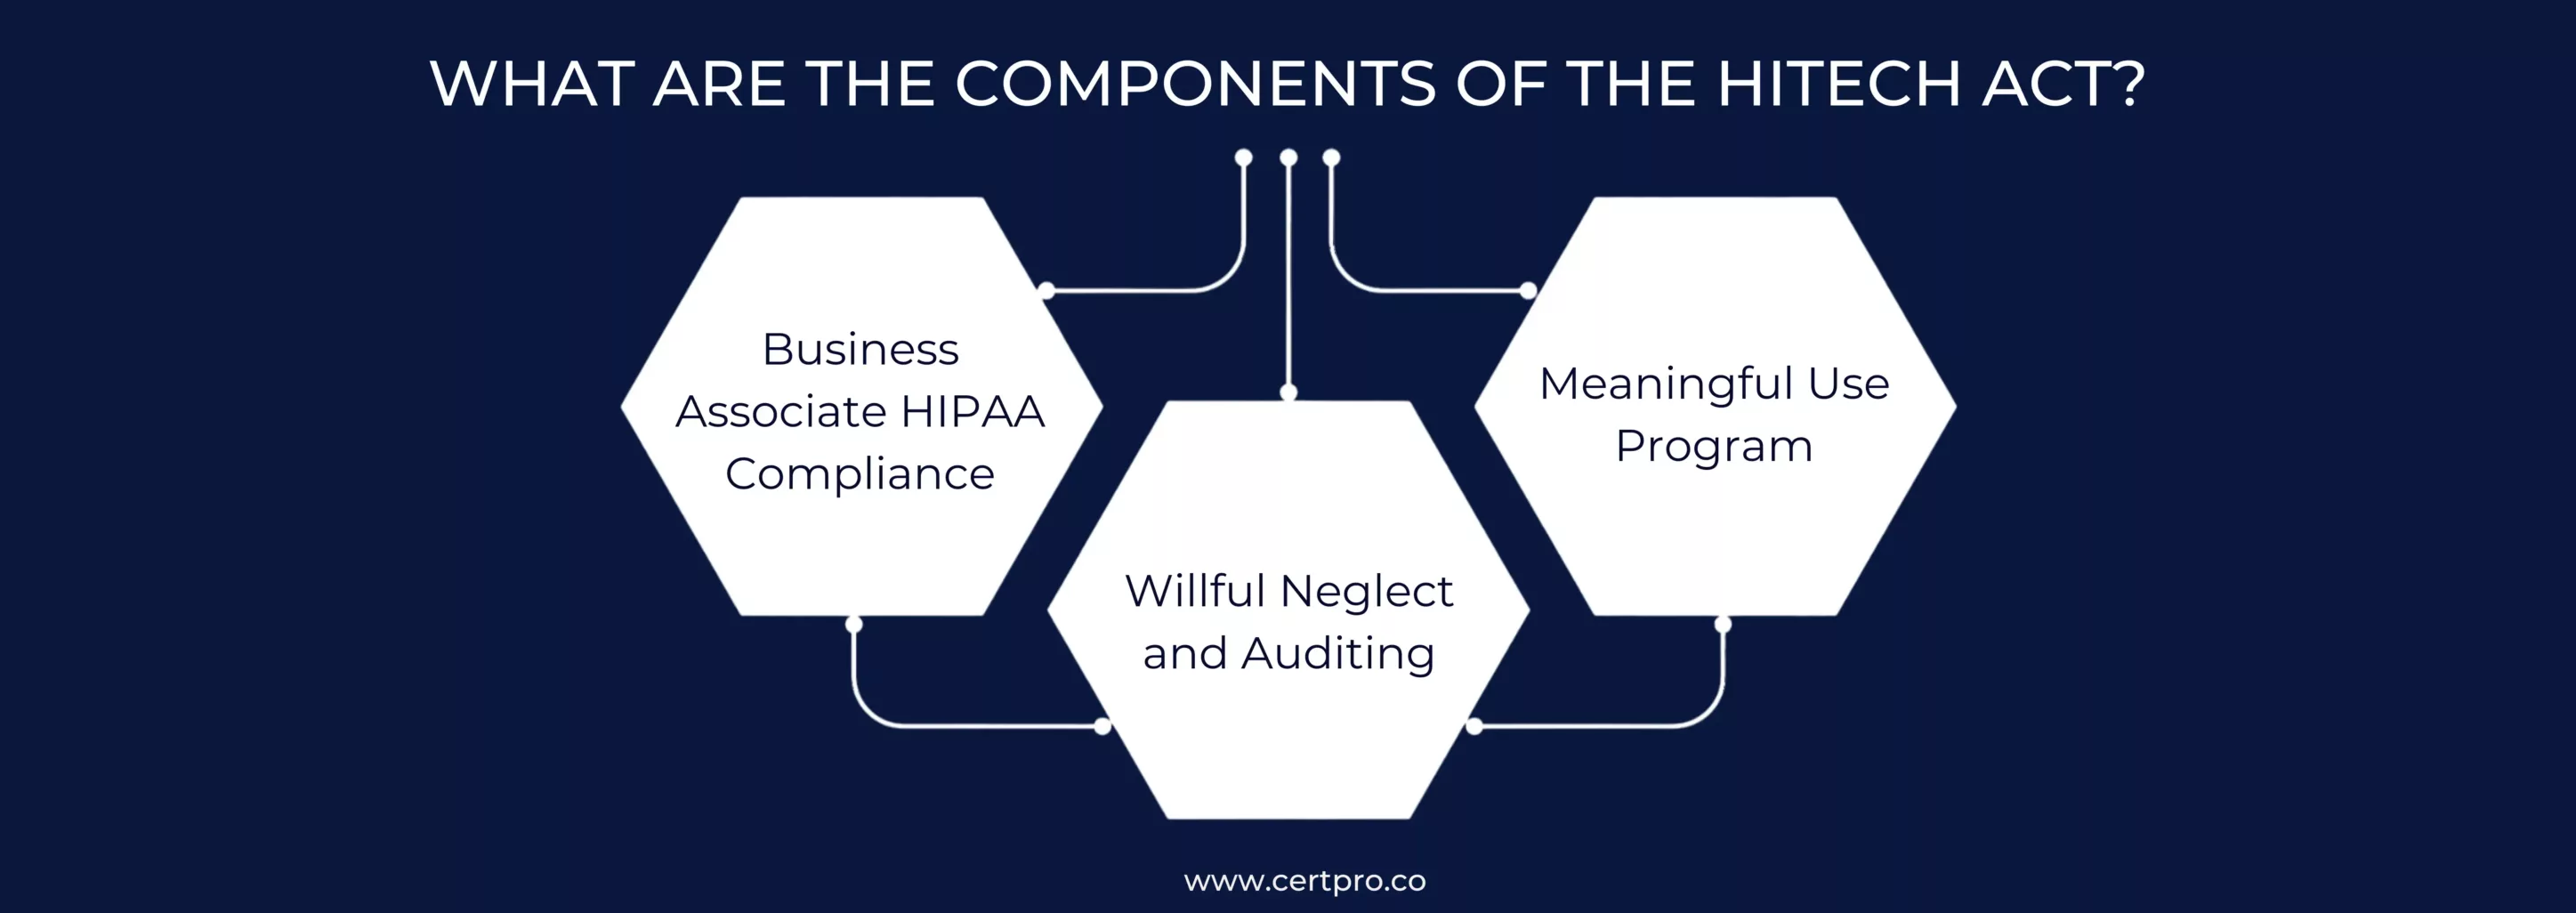 WHAT ARE THE COMPONENTS OF THE HITECH ACT